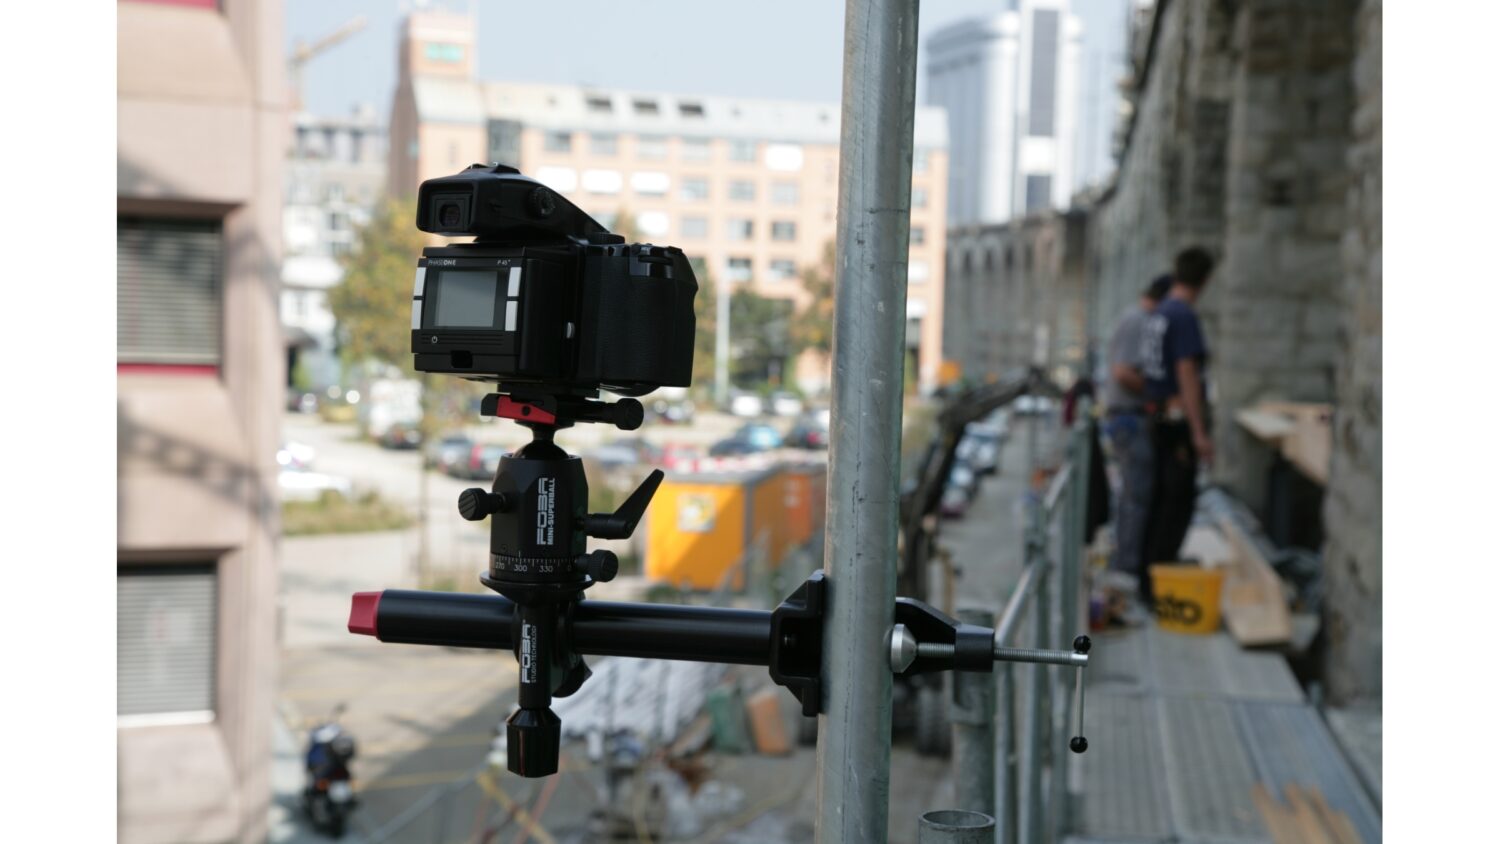 FOBA clamp stand outdoor application